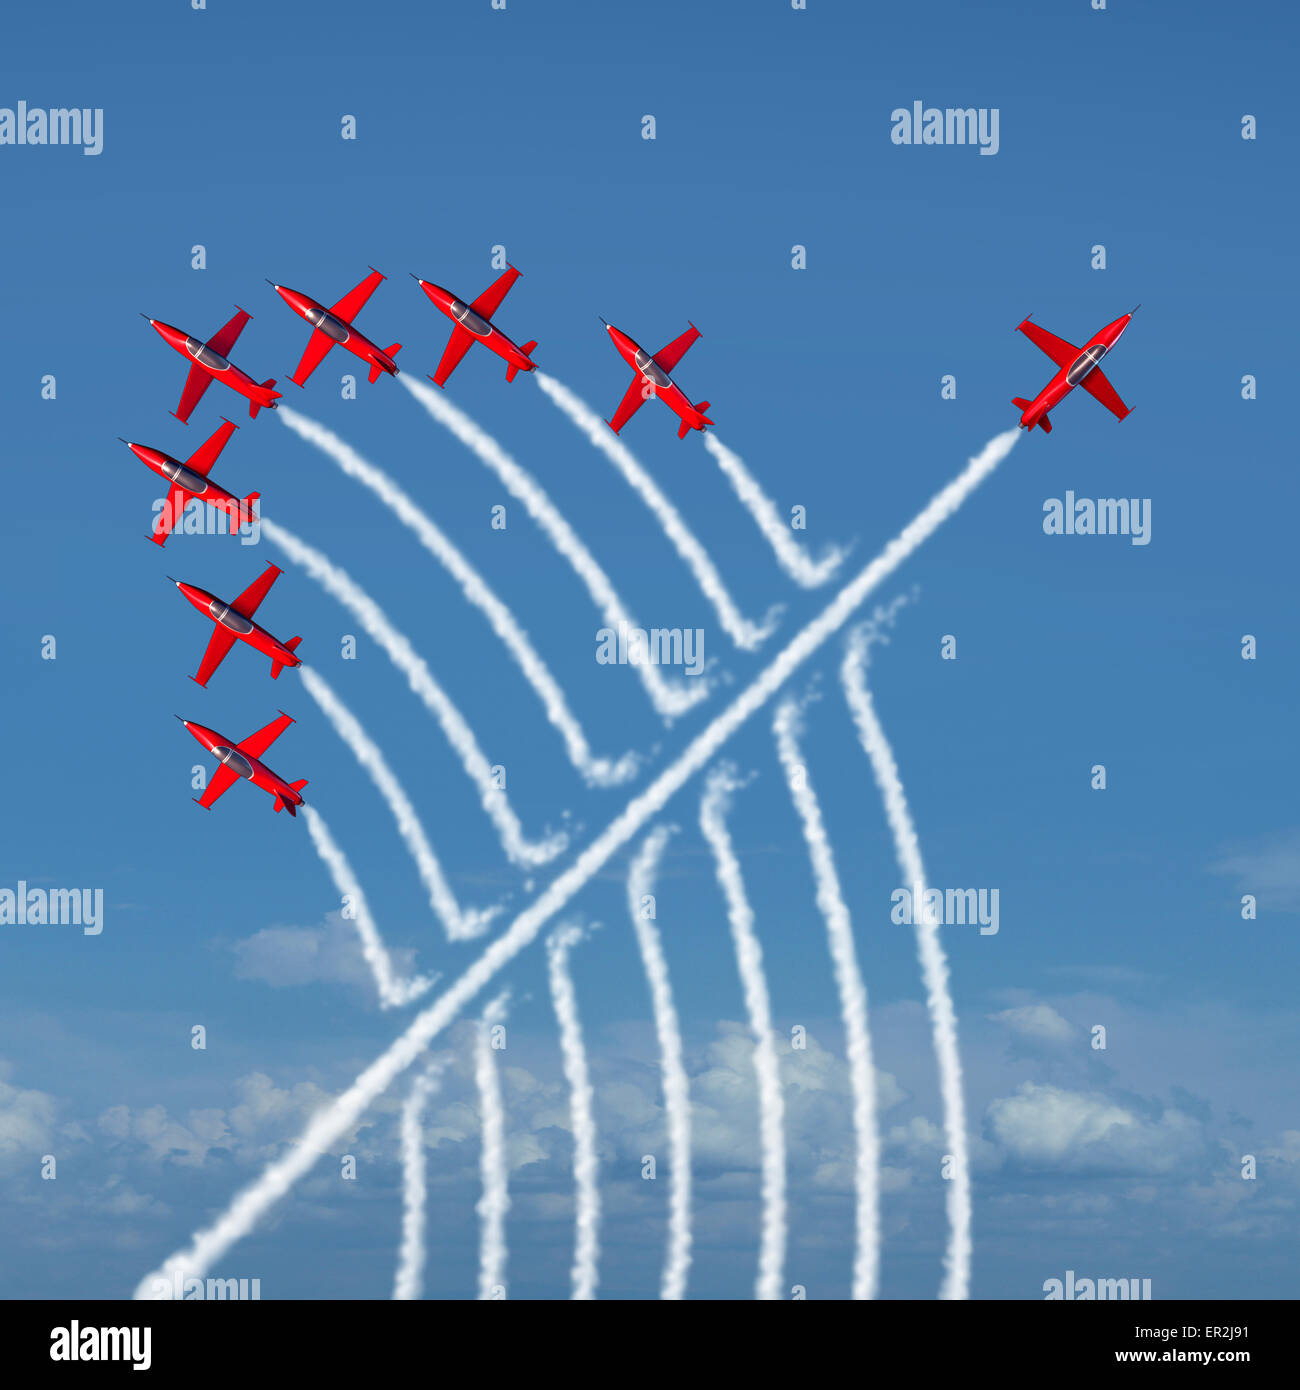 Disruptive innovation Independent leadership concept and individuality as a group of acrobatic jets with one individual jet going in the opposite direction as a business symbol for new thinking and attitude as a different nonconformist maverick. Stock Photo